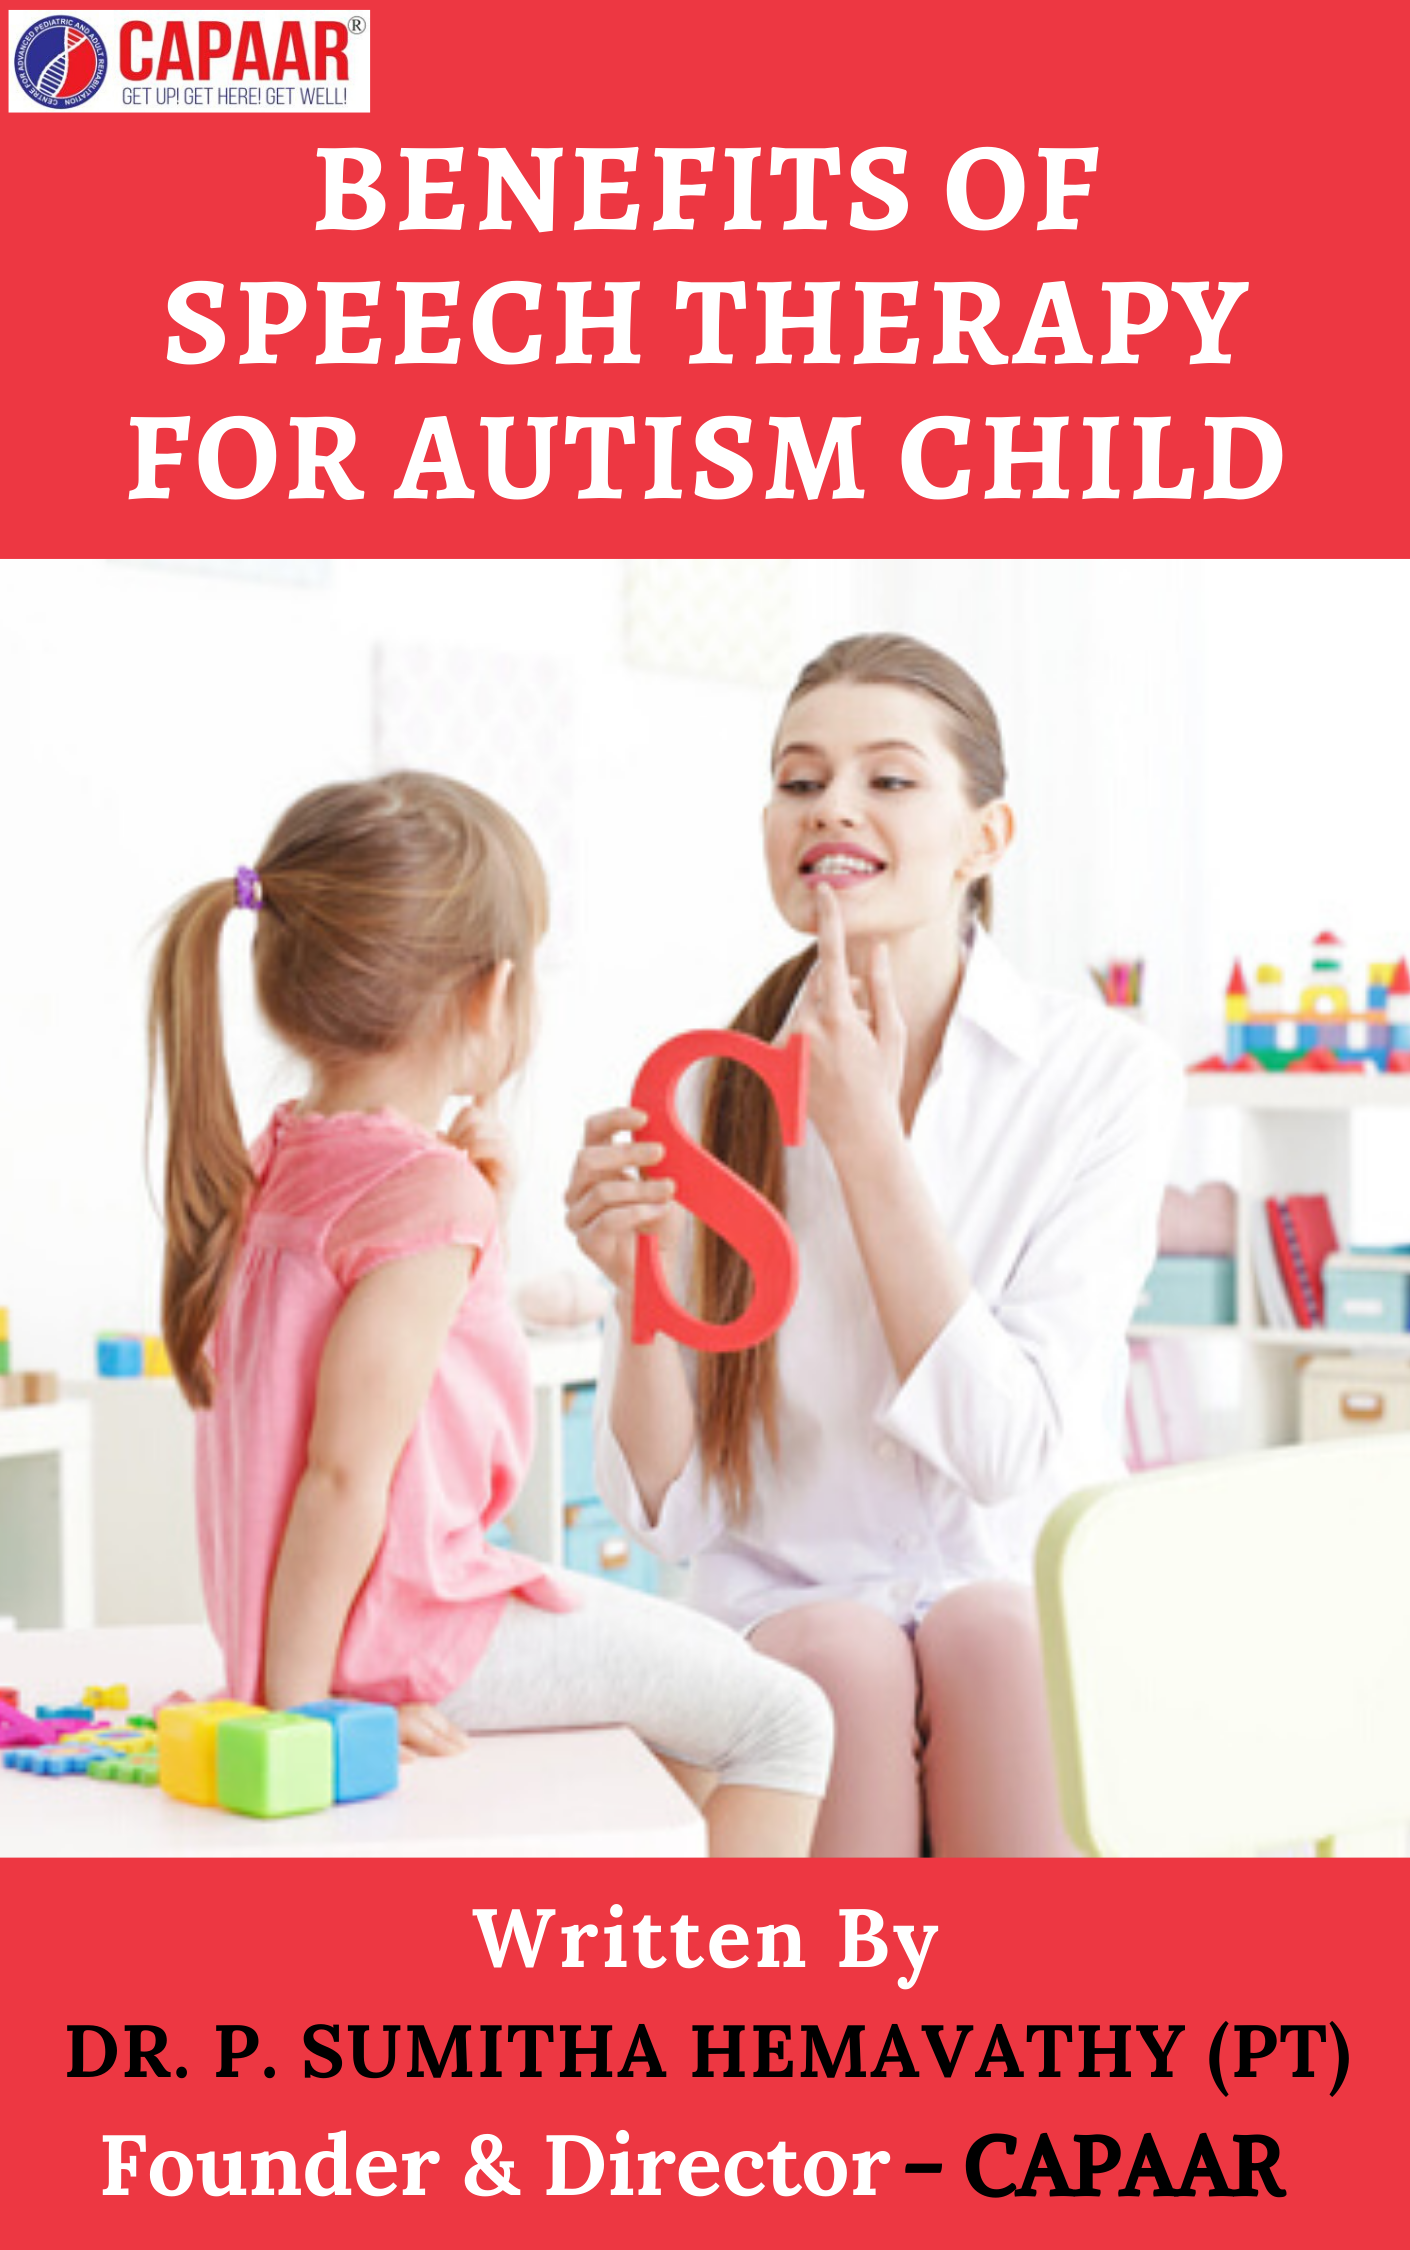 Benefits of Speech Therapy for Autism Child